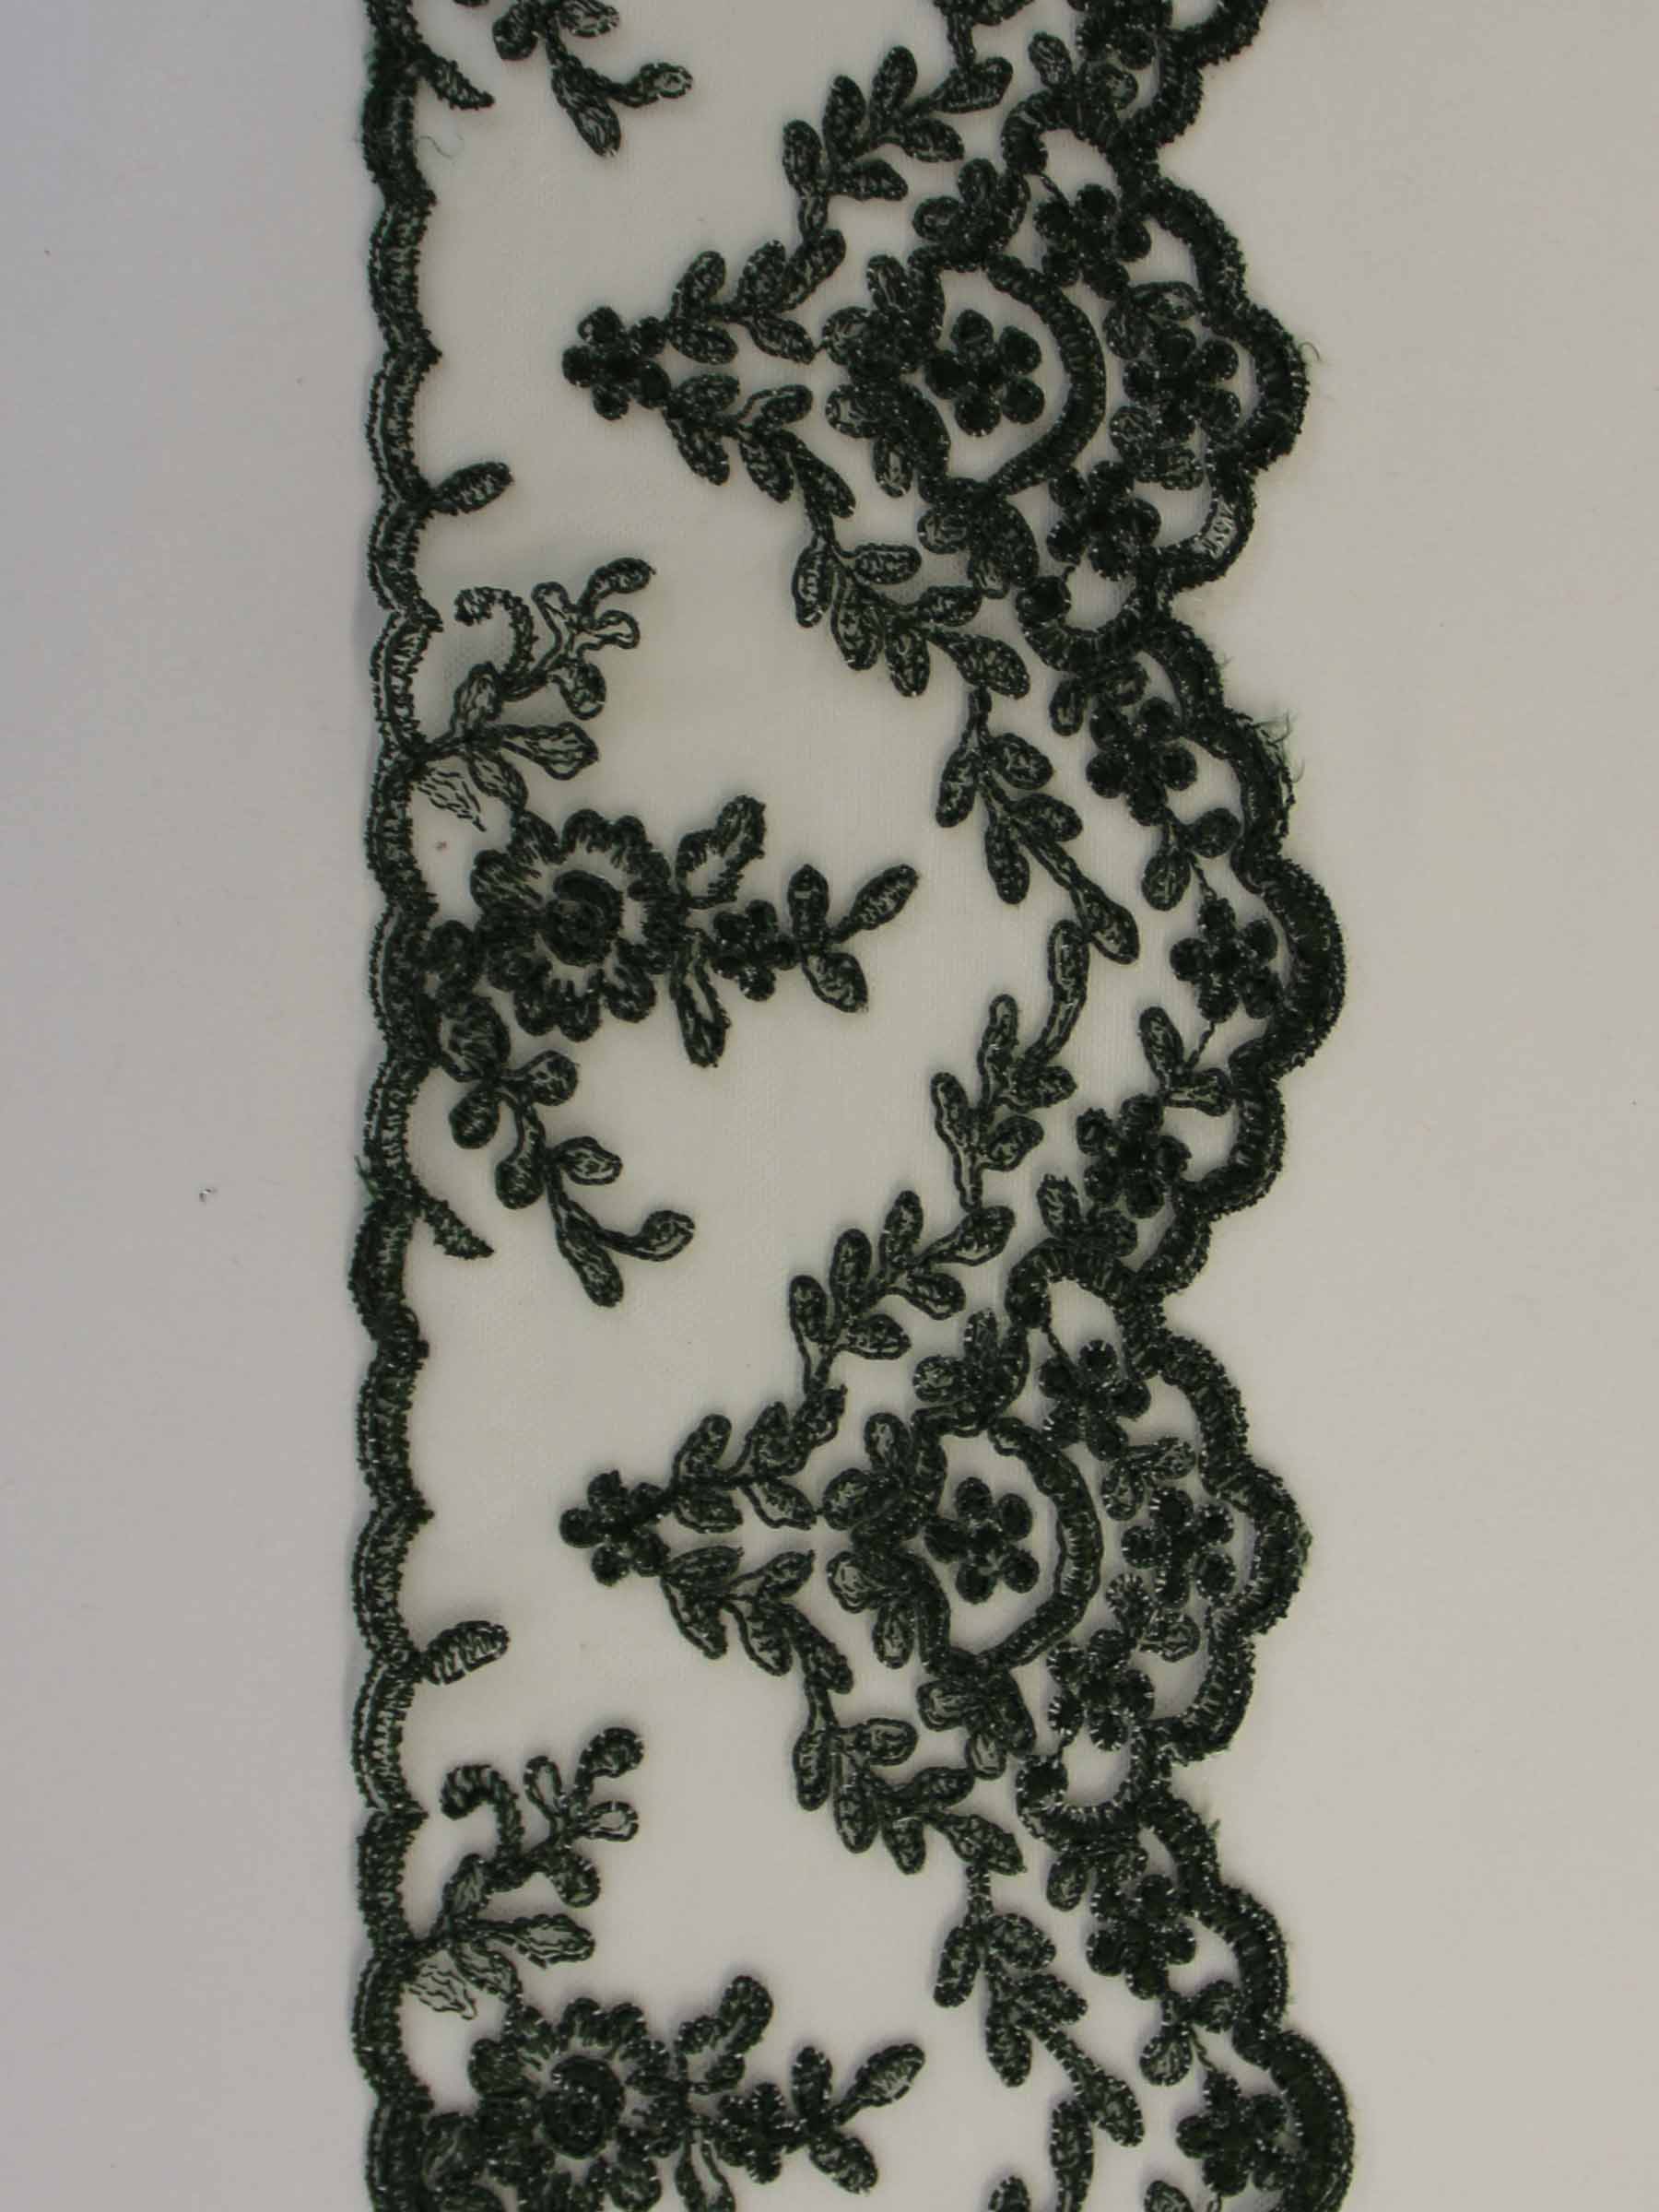 Embroidered Lace Trim, Silver Corded Scallop, 4 Flowers